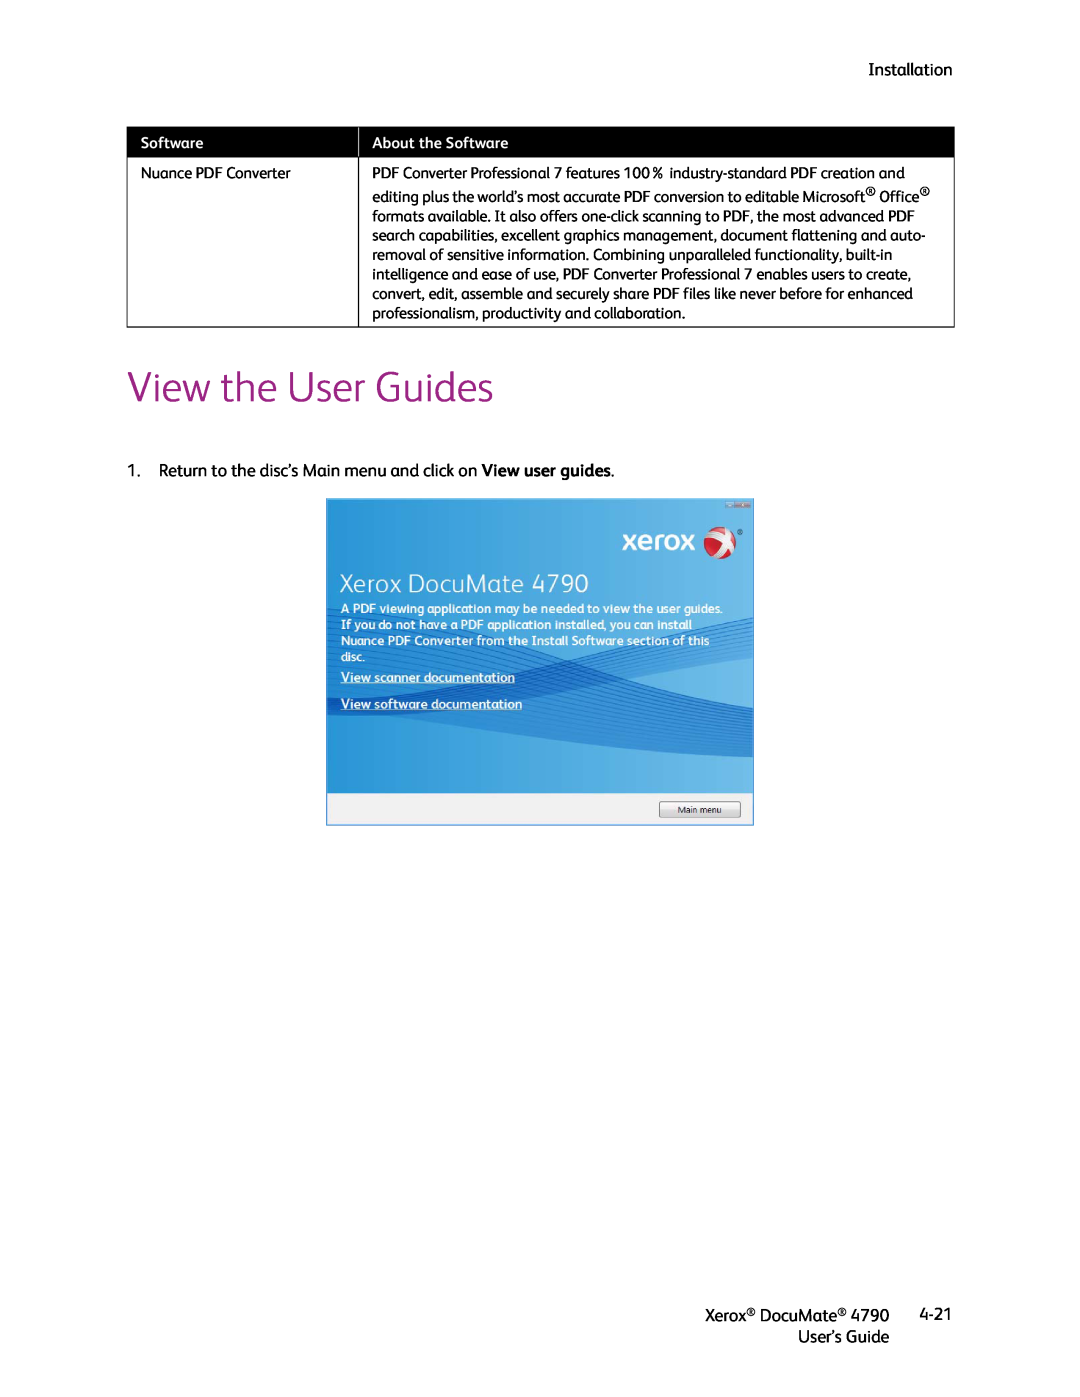 Xerox xerox documate manual View the User Guides, About the Software, Nuance PDF Converter 